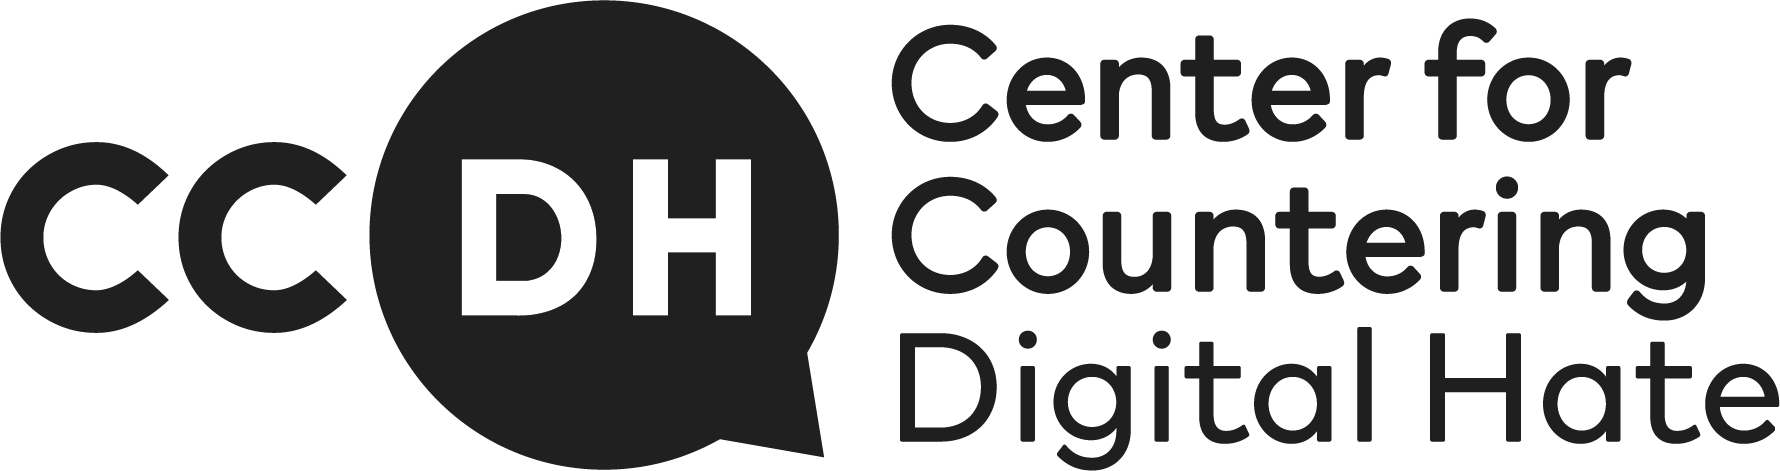 Center for Countering Digital Hate